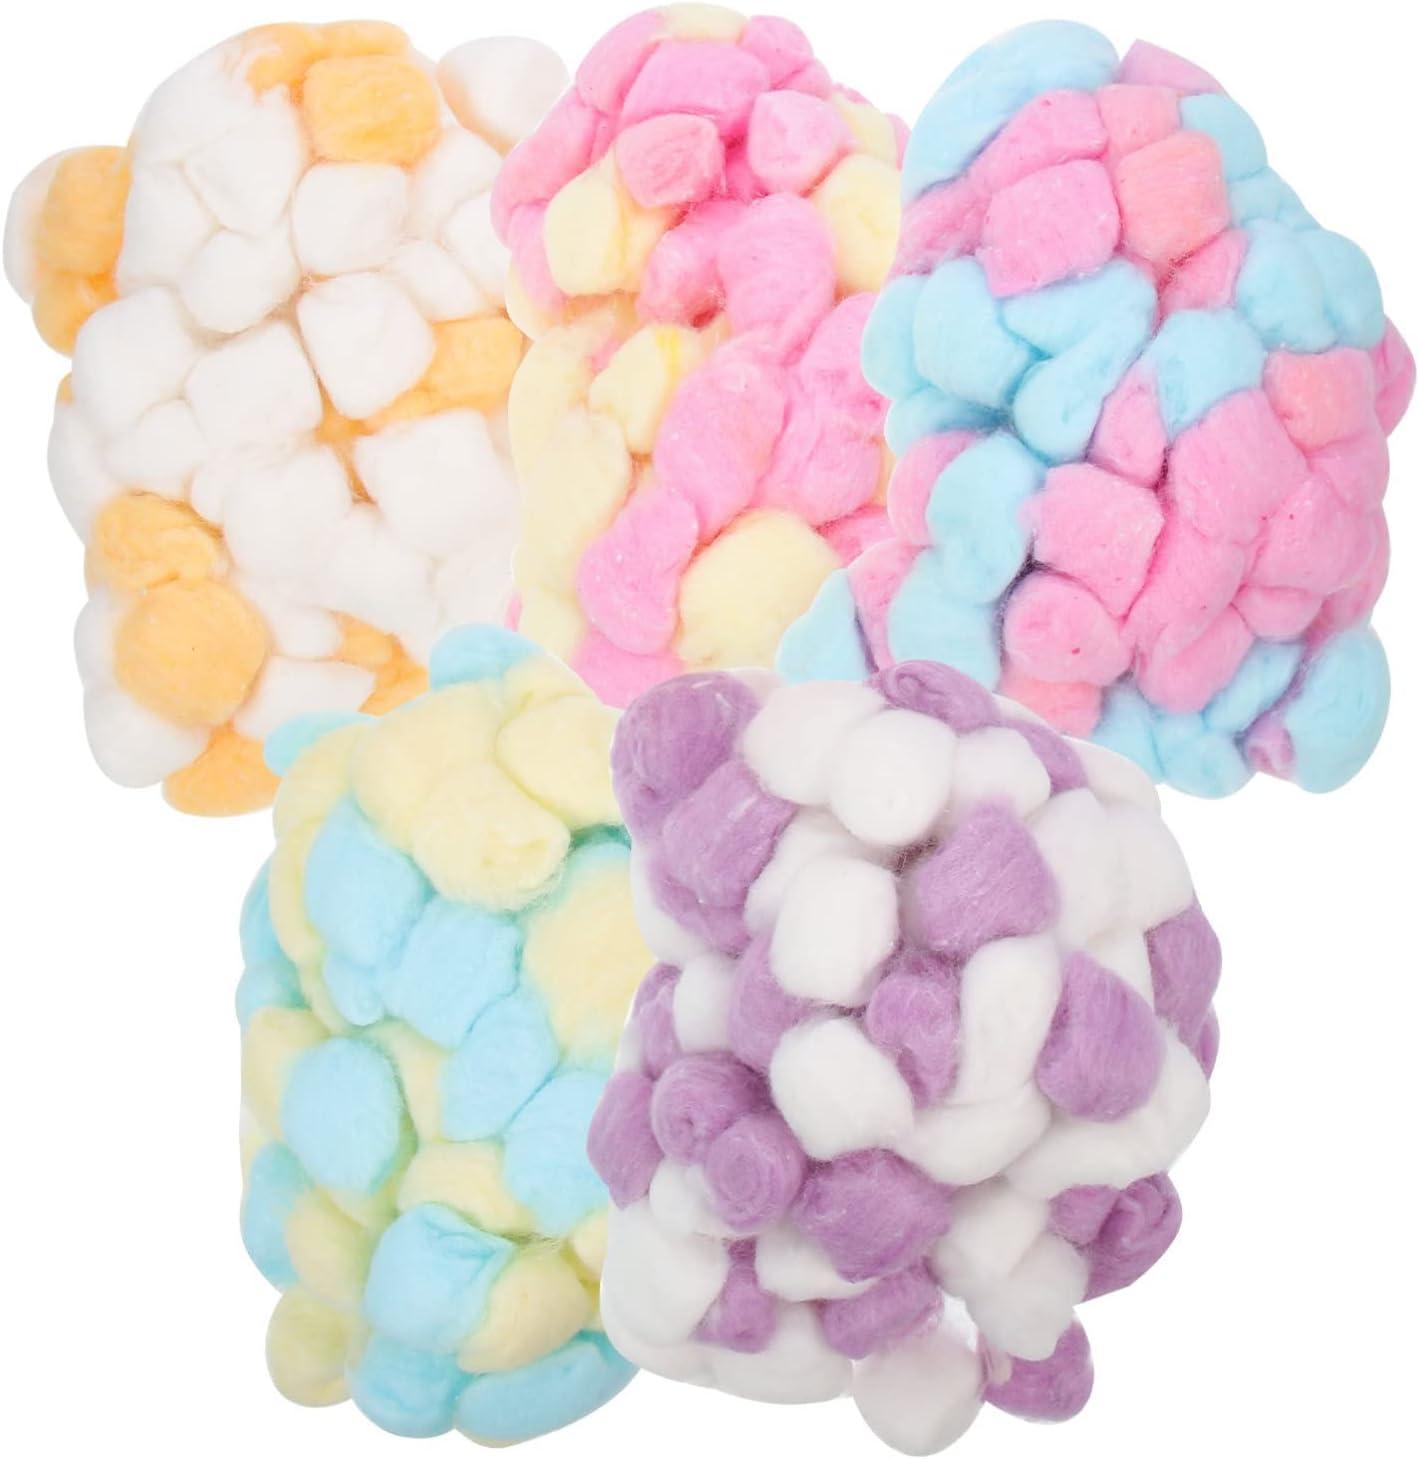 Beavorty 1 Pack Colorful Cotton Balls Cleaning Cotton Balls face Cleaning  Supplies Cotton Balls for face Colored Cotton Balls Small Cotton Balls